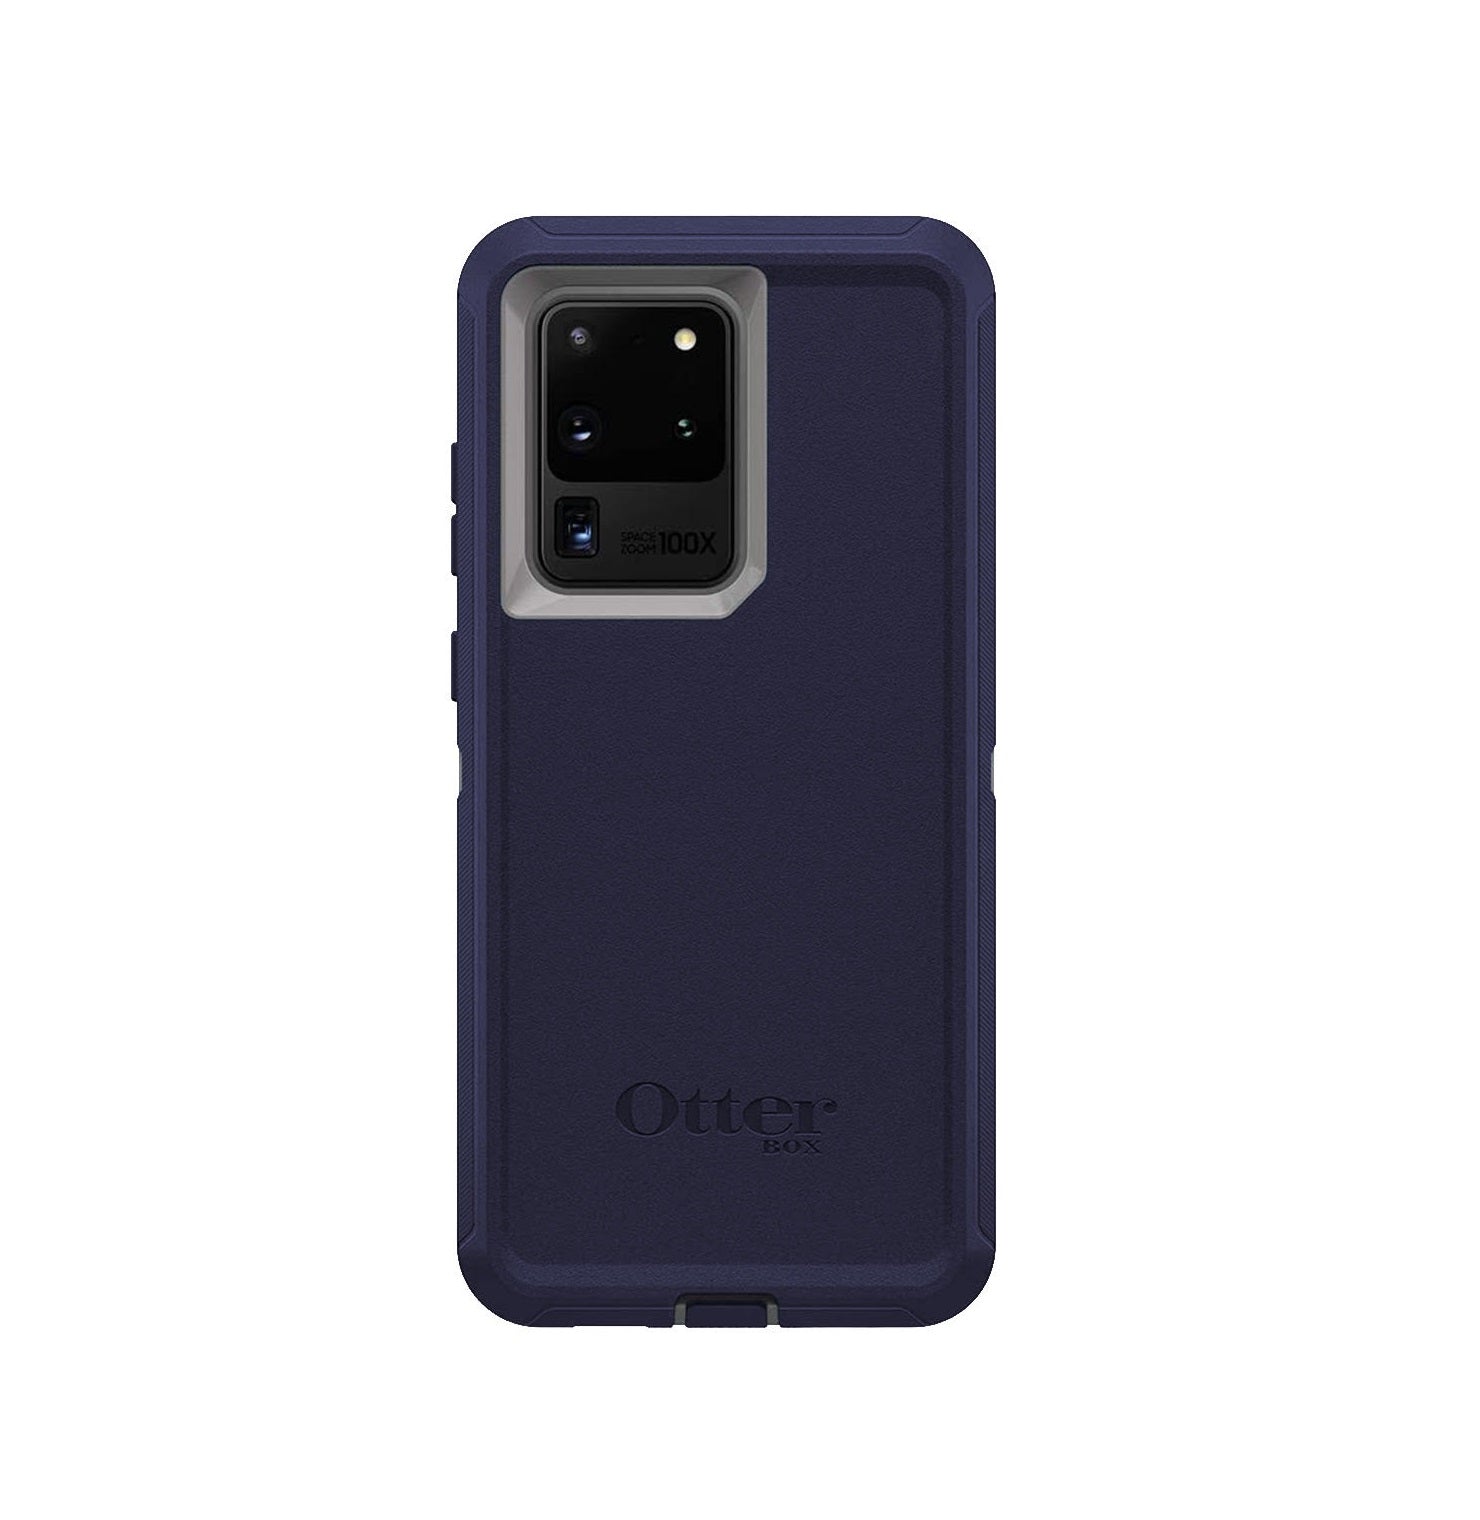 https://caserace.net/products/otterbox-defender-series-screenless-edition-case-for-samsung-galaxy-s20-ultra-navy-grey